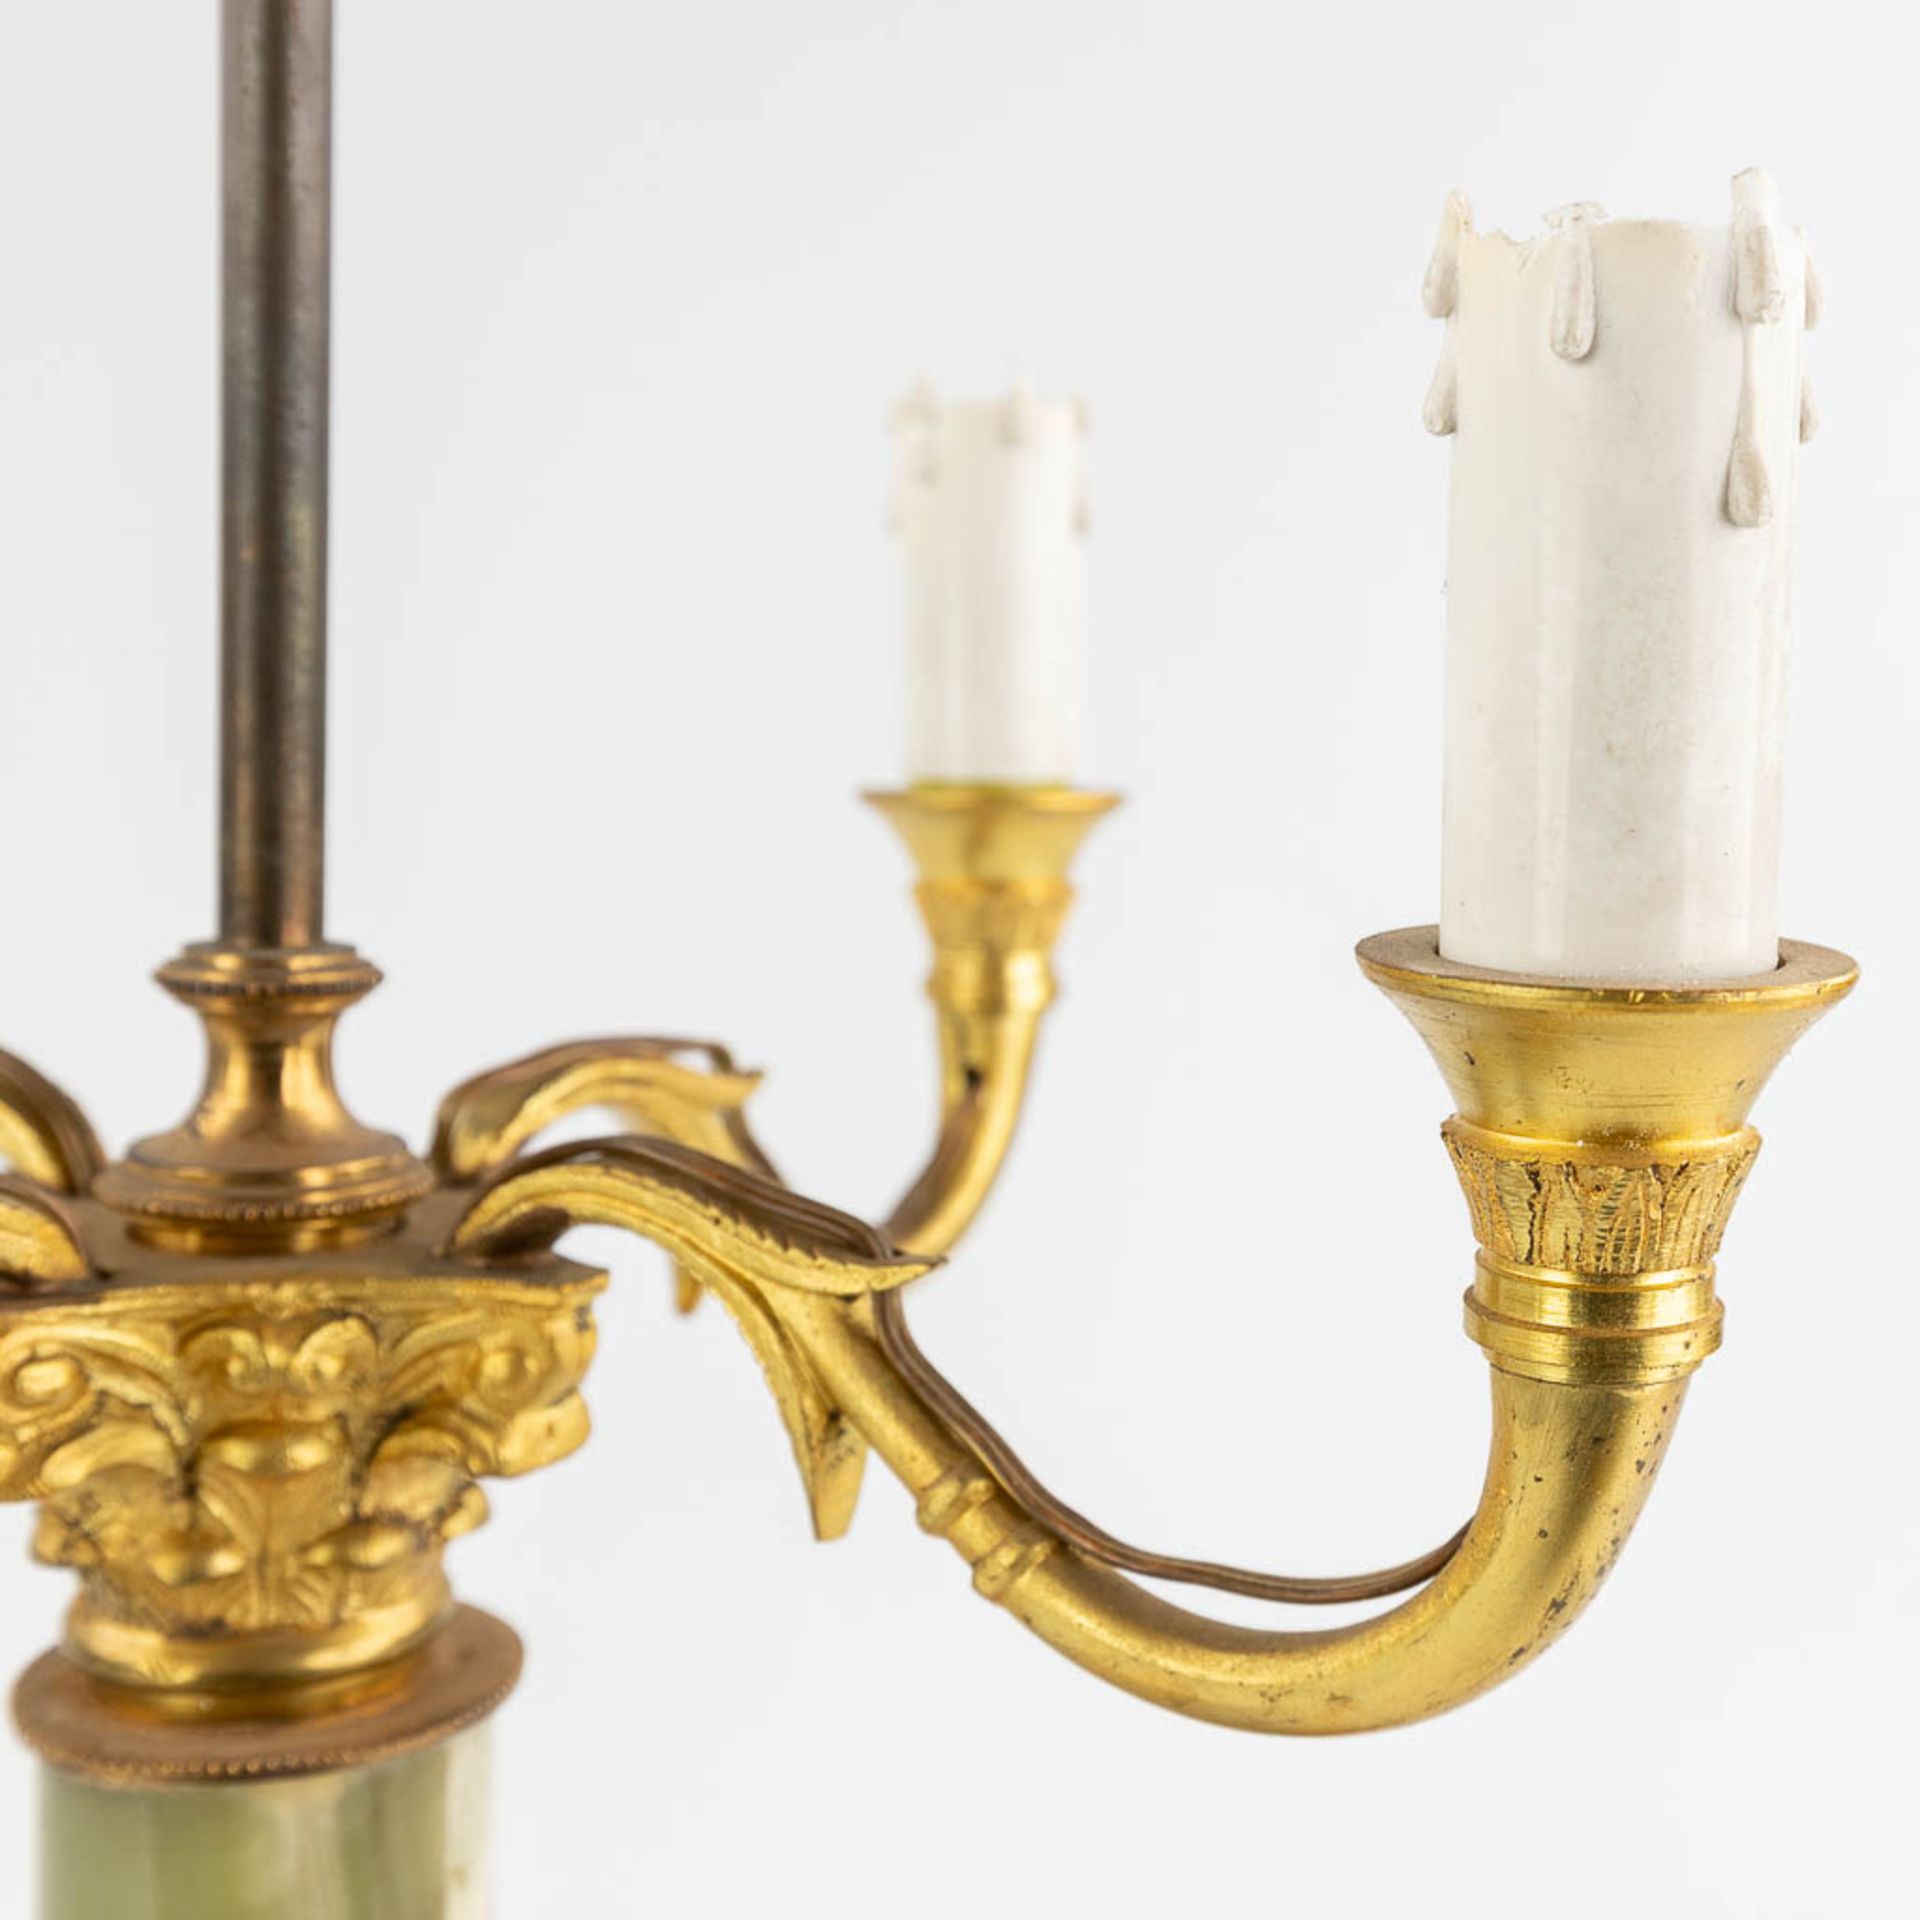 A table lamp, brass and onyx. 20th century. (L: 30 x W: 30 x H: 77 cm) - Image 11 of 13